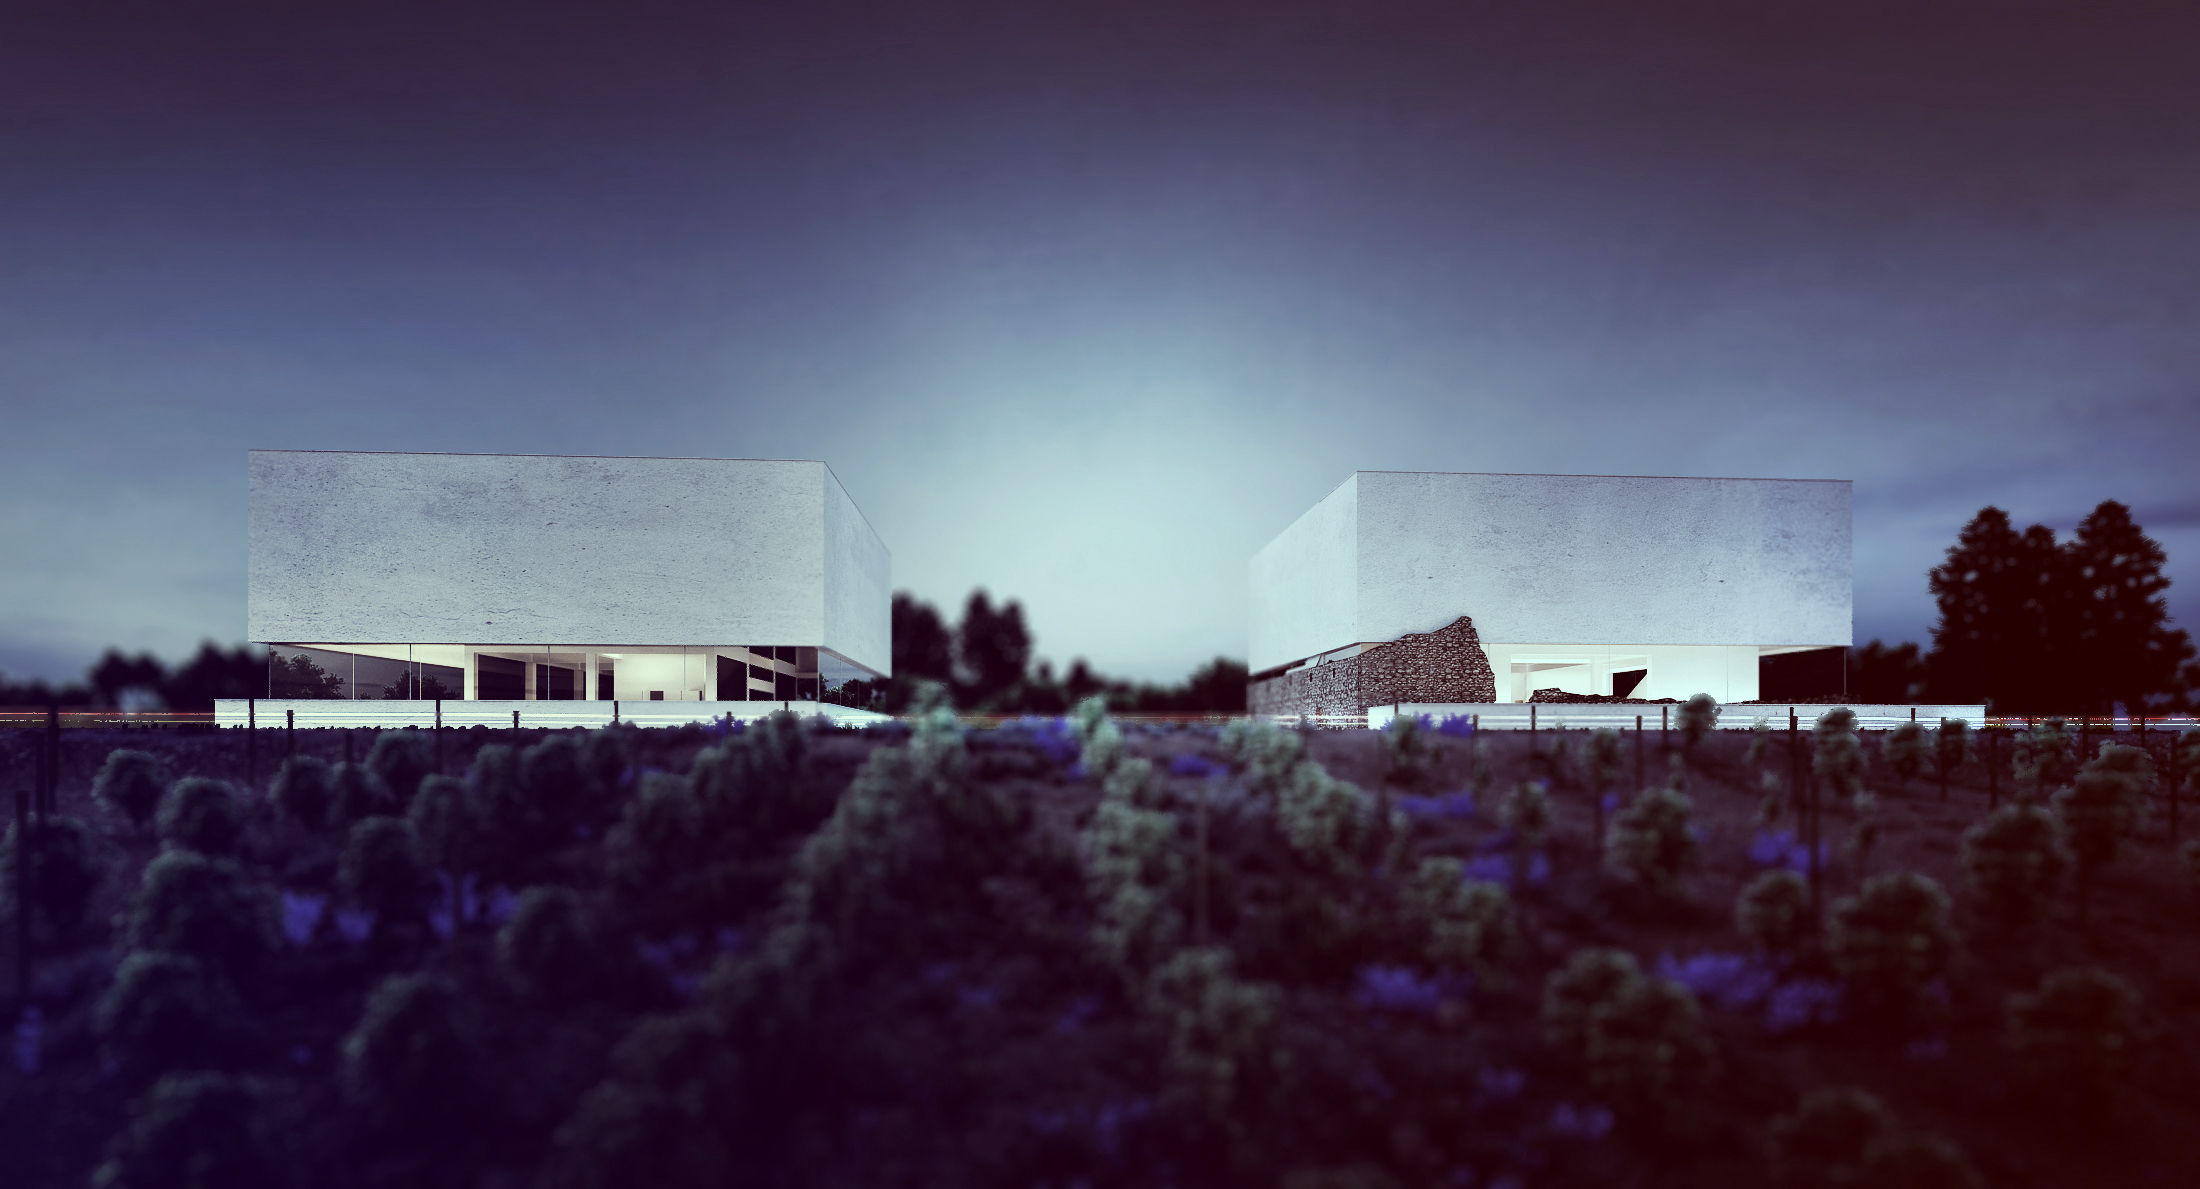 architectural-concept-of-vineyard-in-requena-